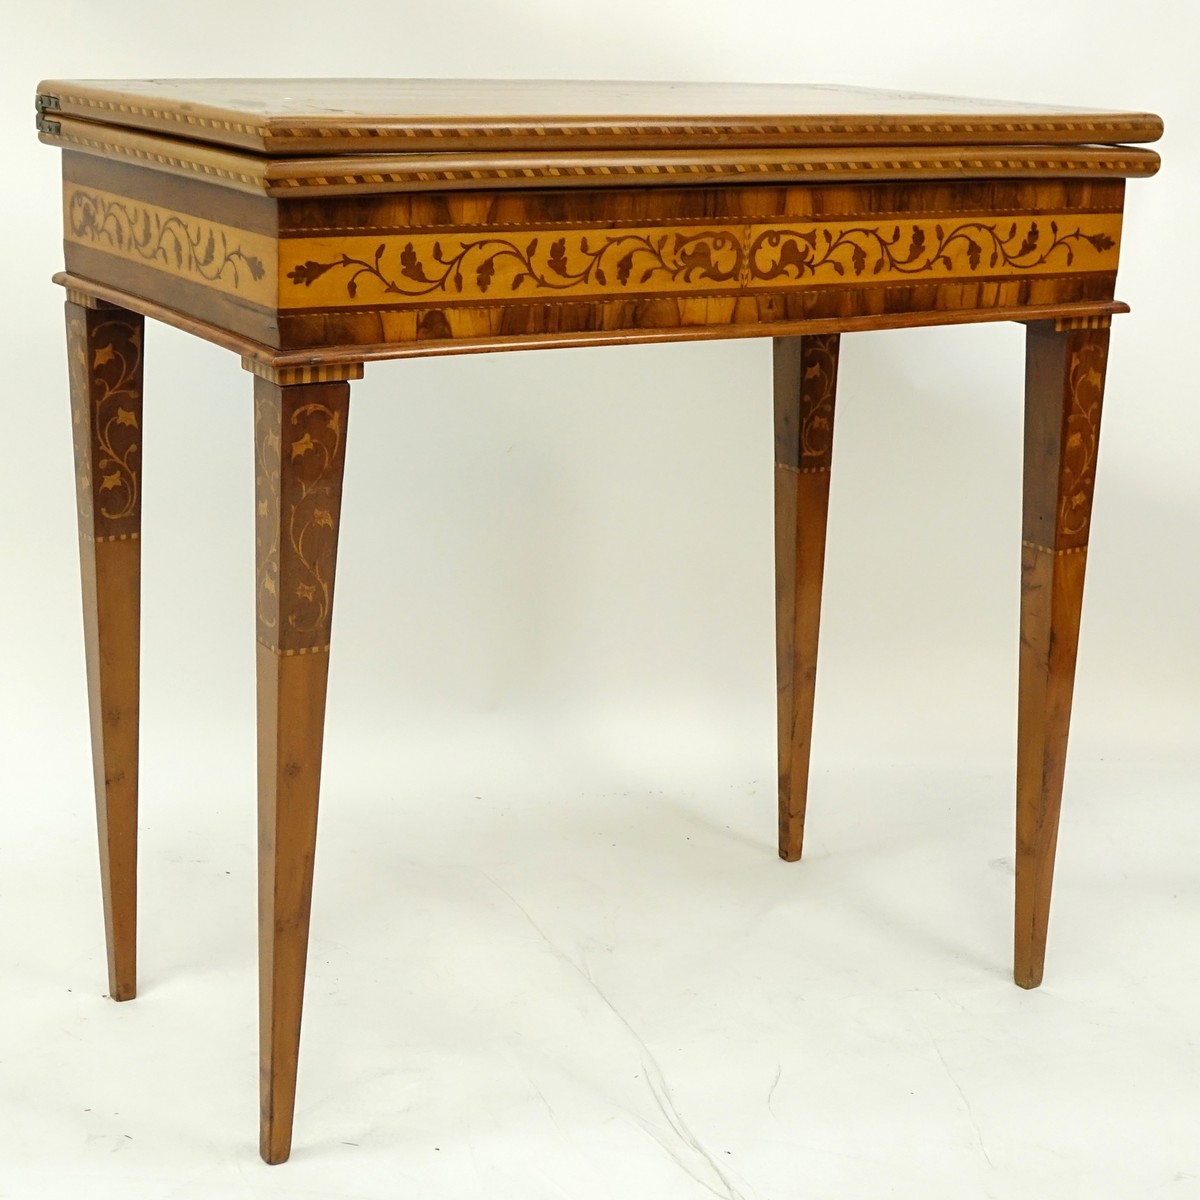 Antique Marquetry Inlaid Flip Top Game Table. Floral and scenic inlay work throughout the surface.